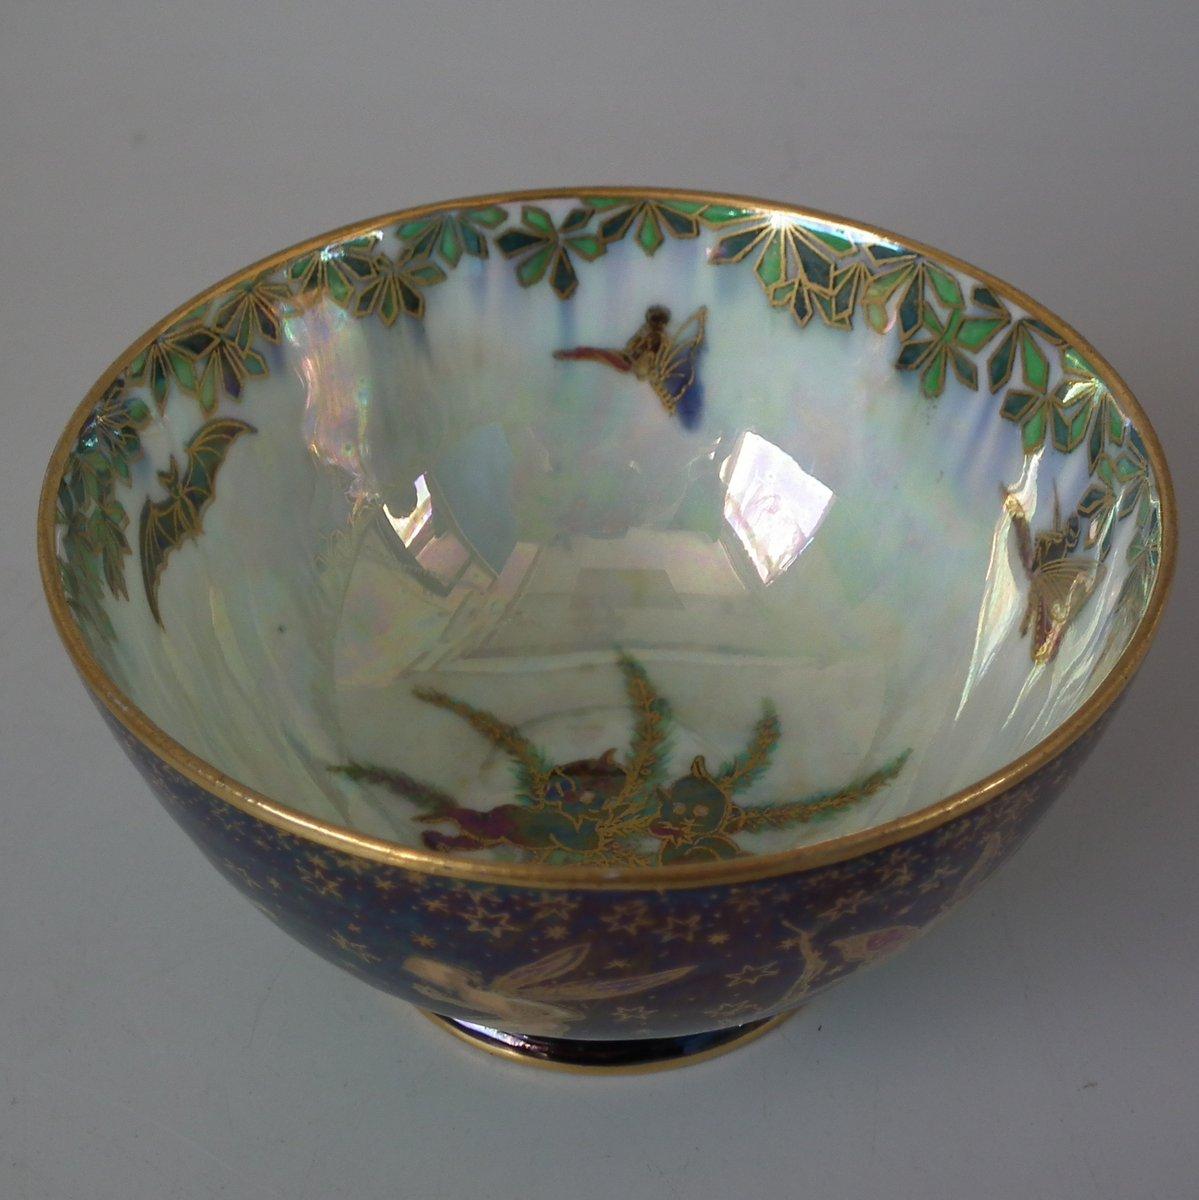 Wedgwood Fairyland Lustre York cup. Exterior decorated with 'Leapfrogging Elves' design on black ground. 'Elves on a Branch' design on mother of pearl ground to interior. 'Portland Vase' backstamp to the underside.